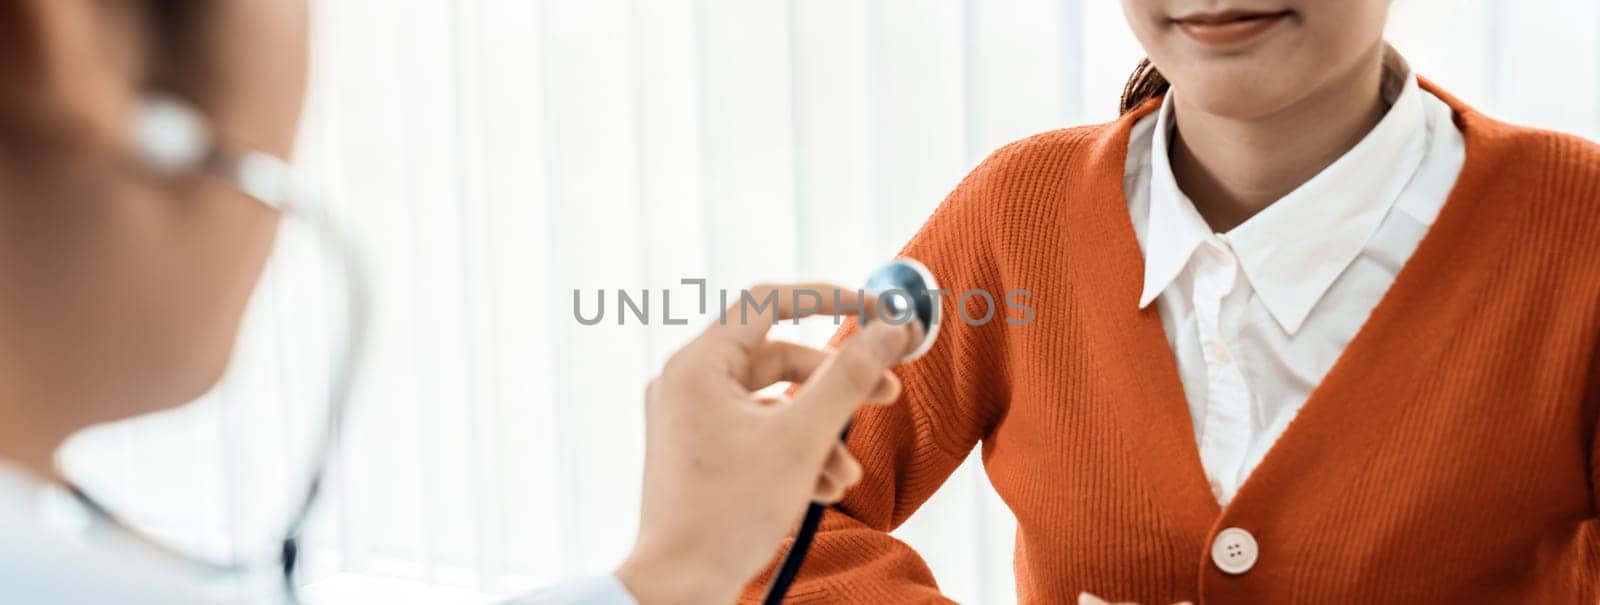 Doctor check patients's pulse with stethoscope in hospital. Rigid by biancoblue